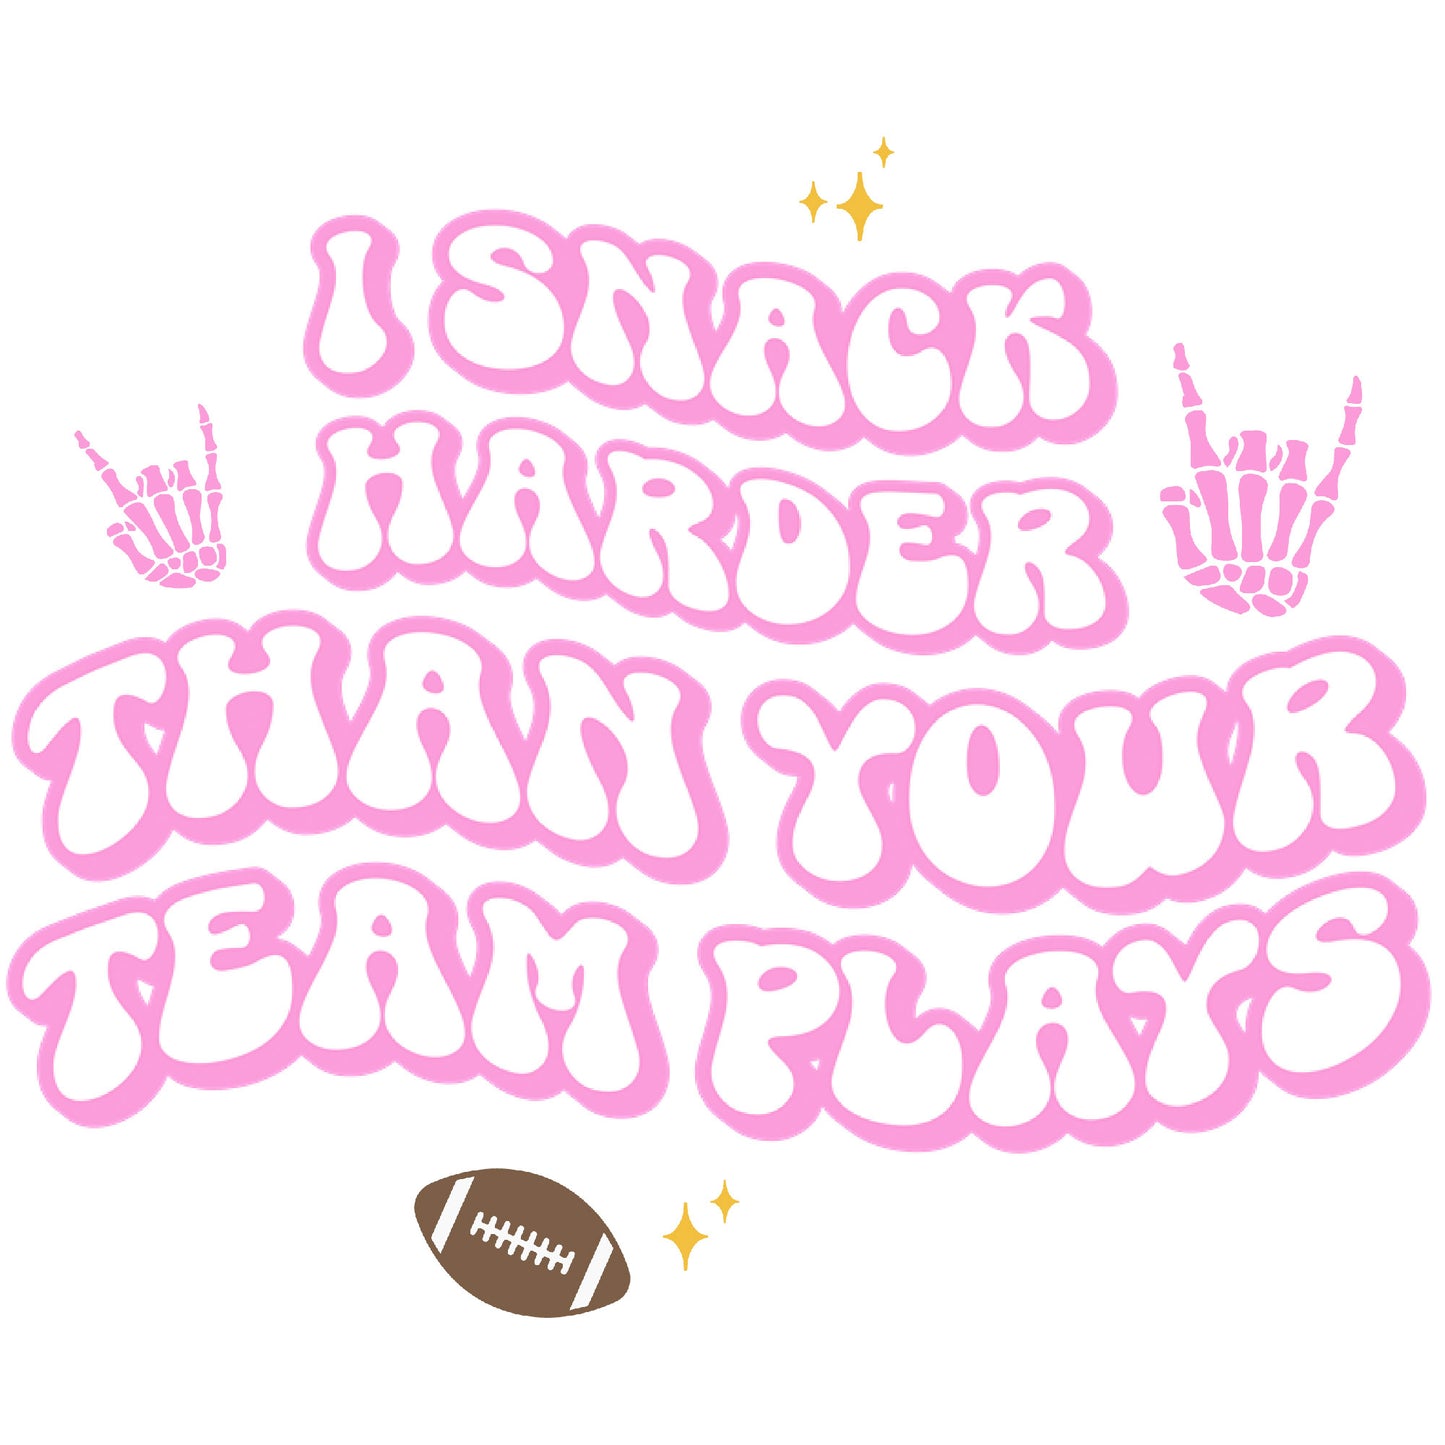 American Football Trendsetter Tee: I Snack Harder Than Your Team Plays